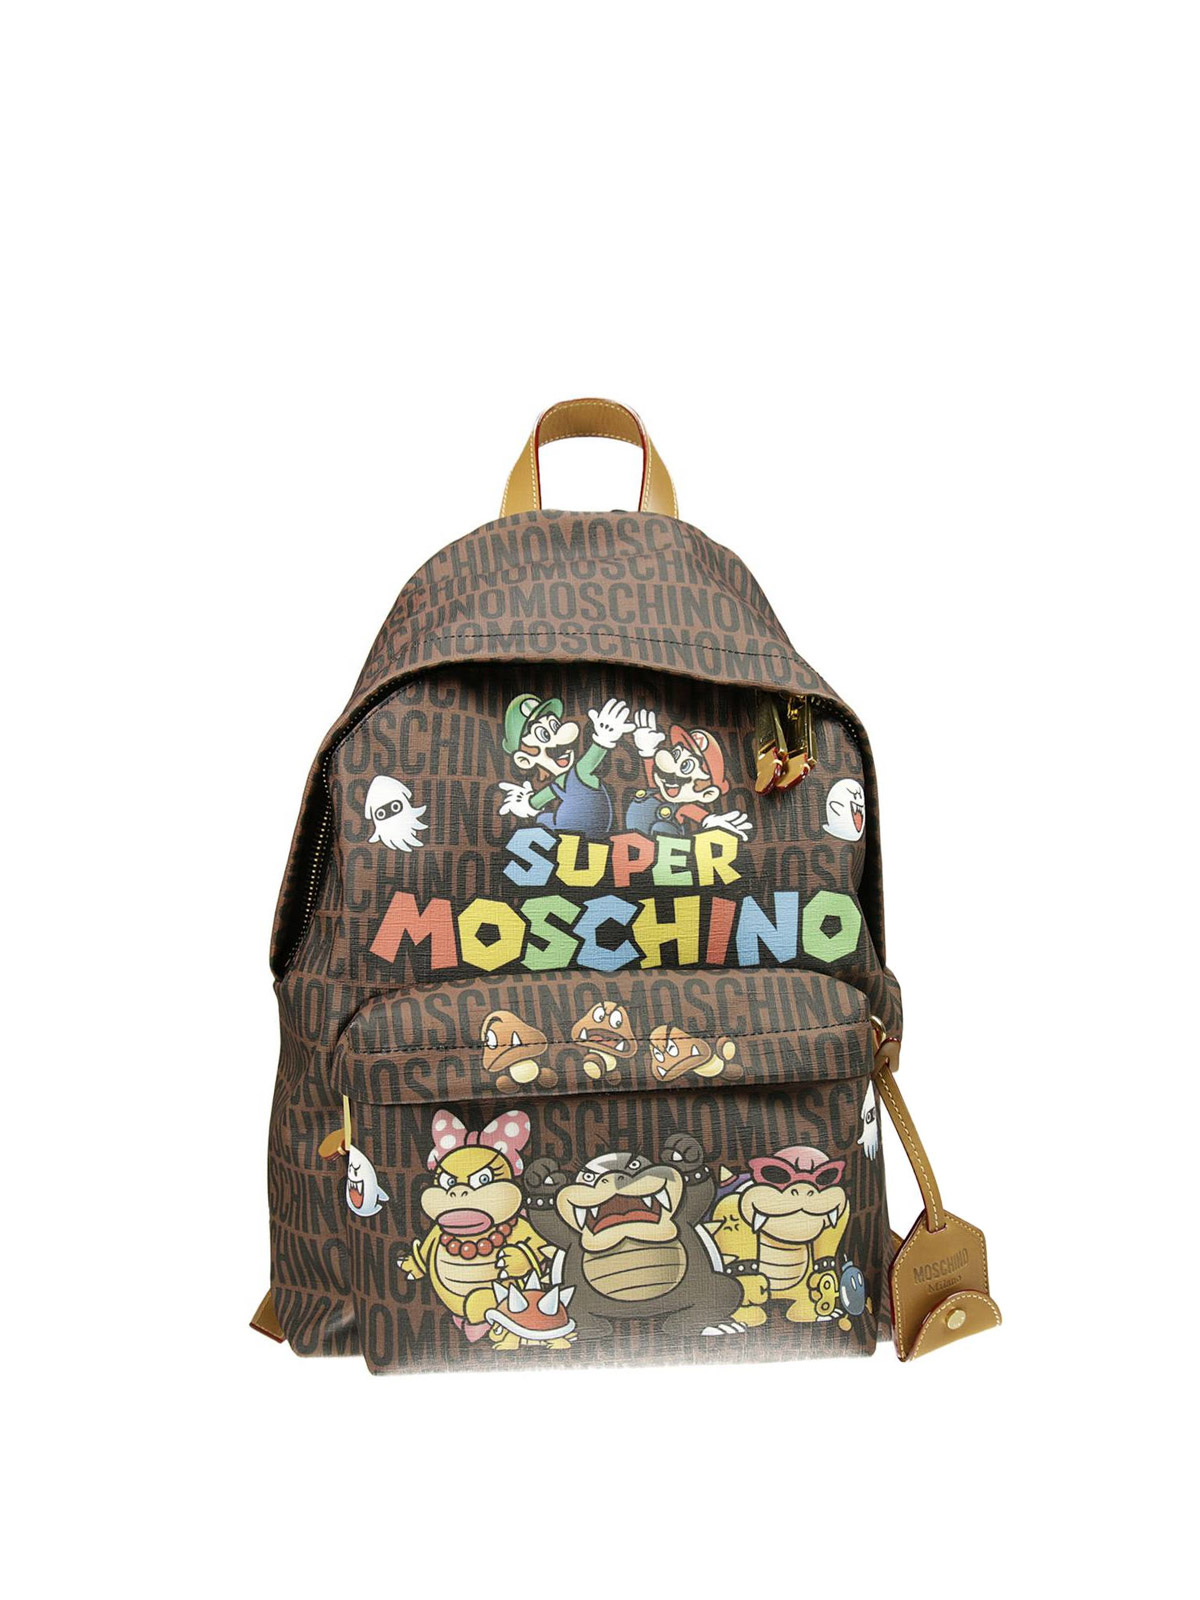 Super Moschino patterned backpack 